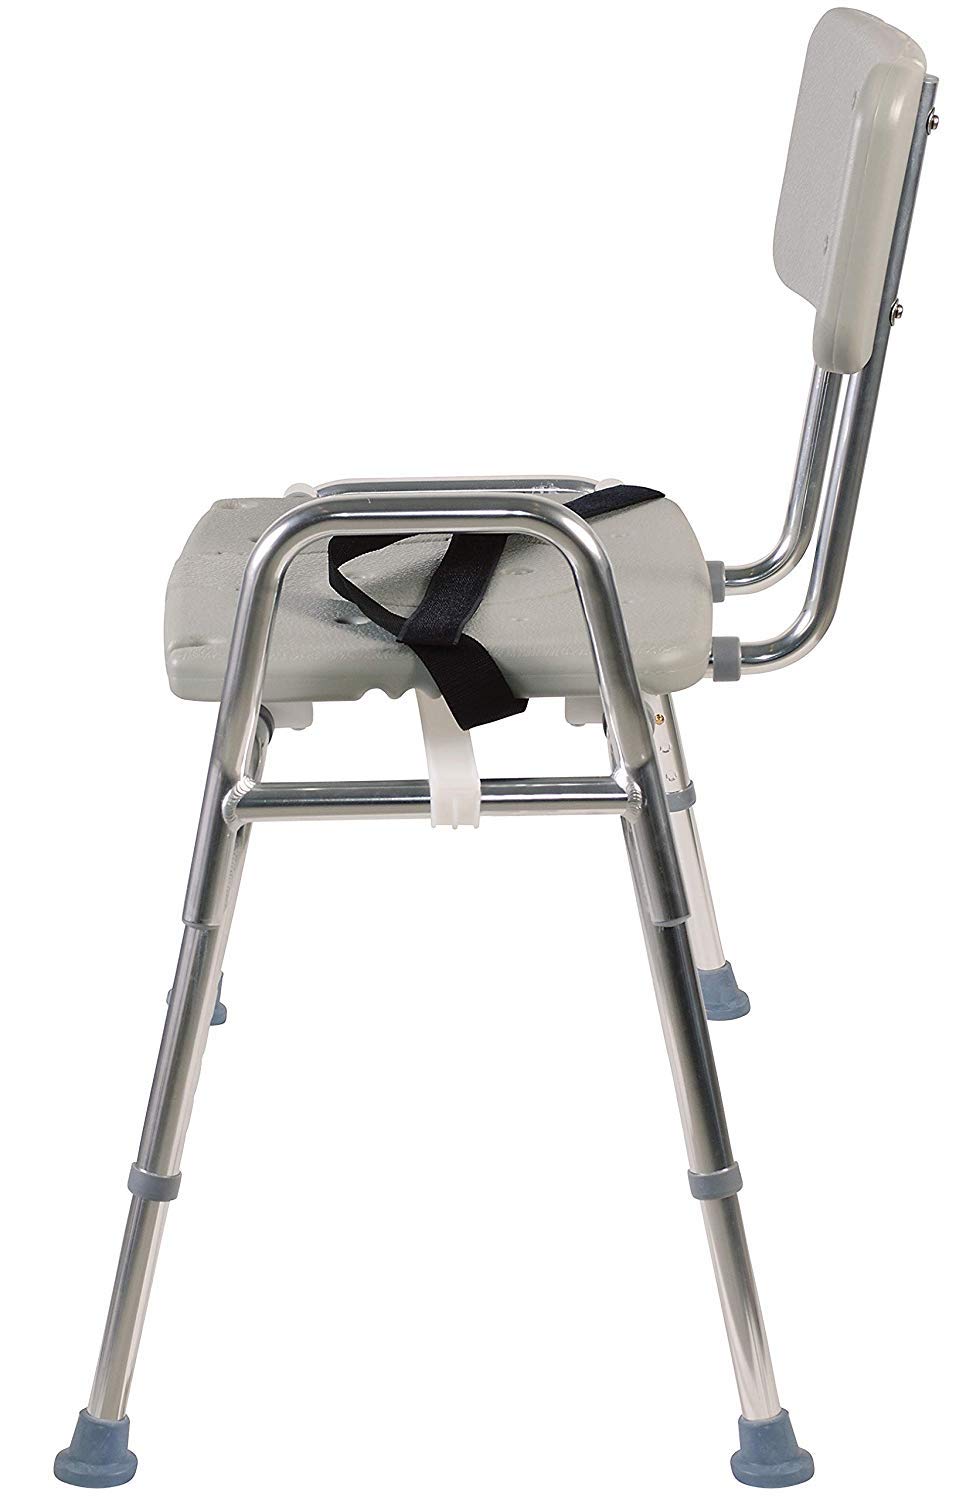 DMI Sliding Transfer Bench Shower Chair with Cut-Out Seat AM-522-1734-1900